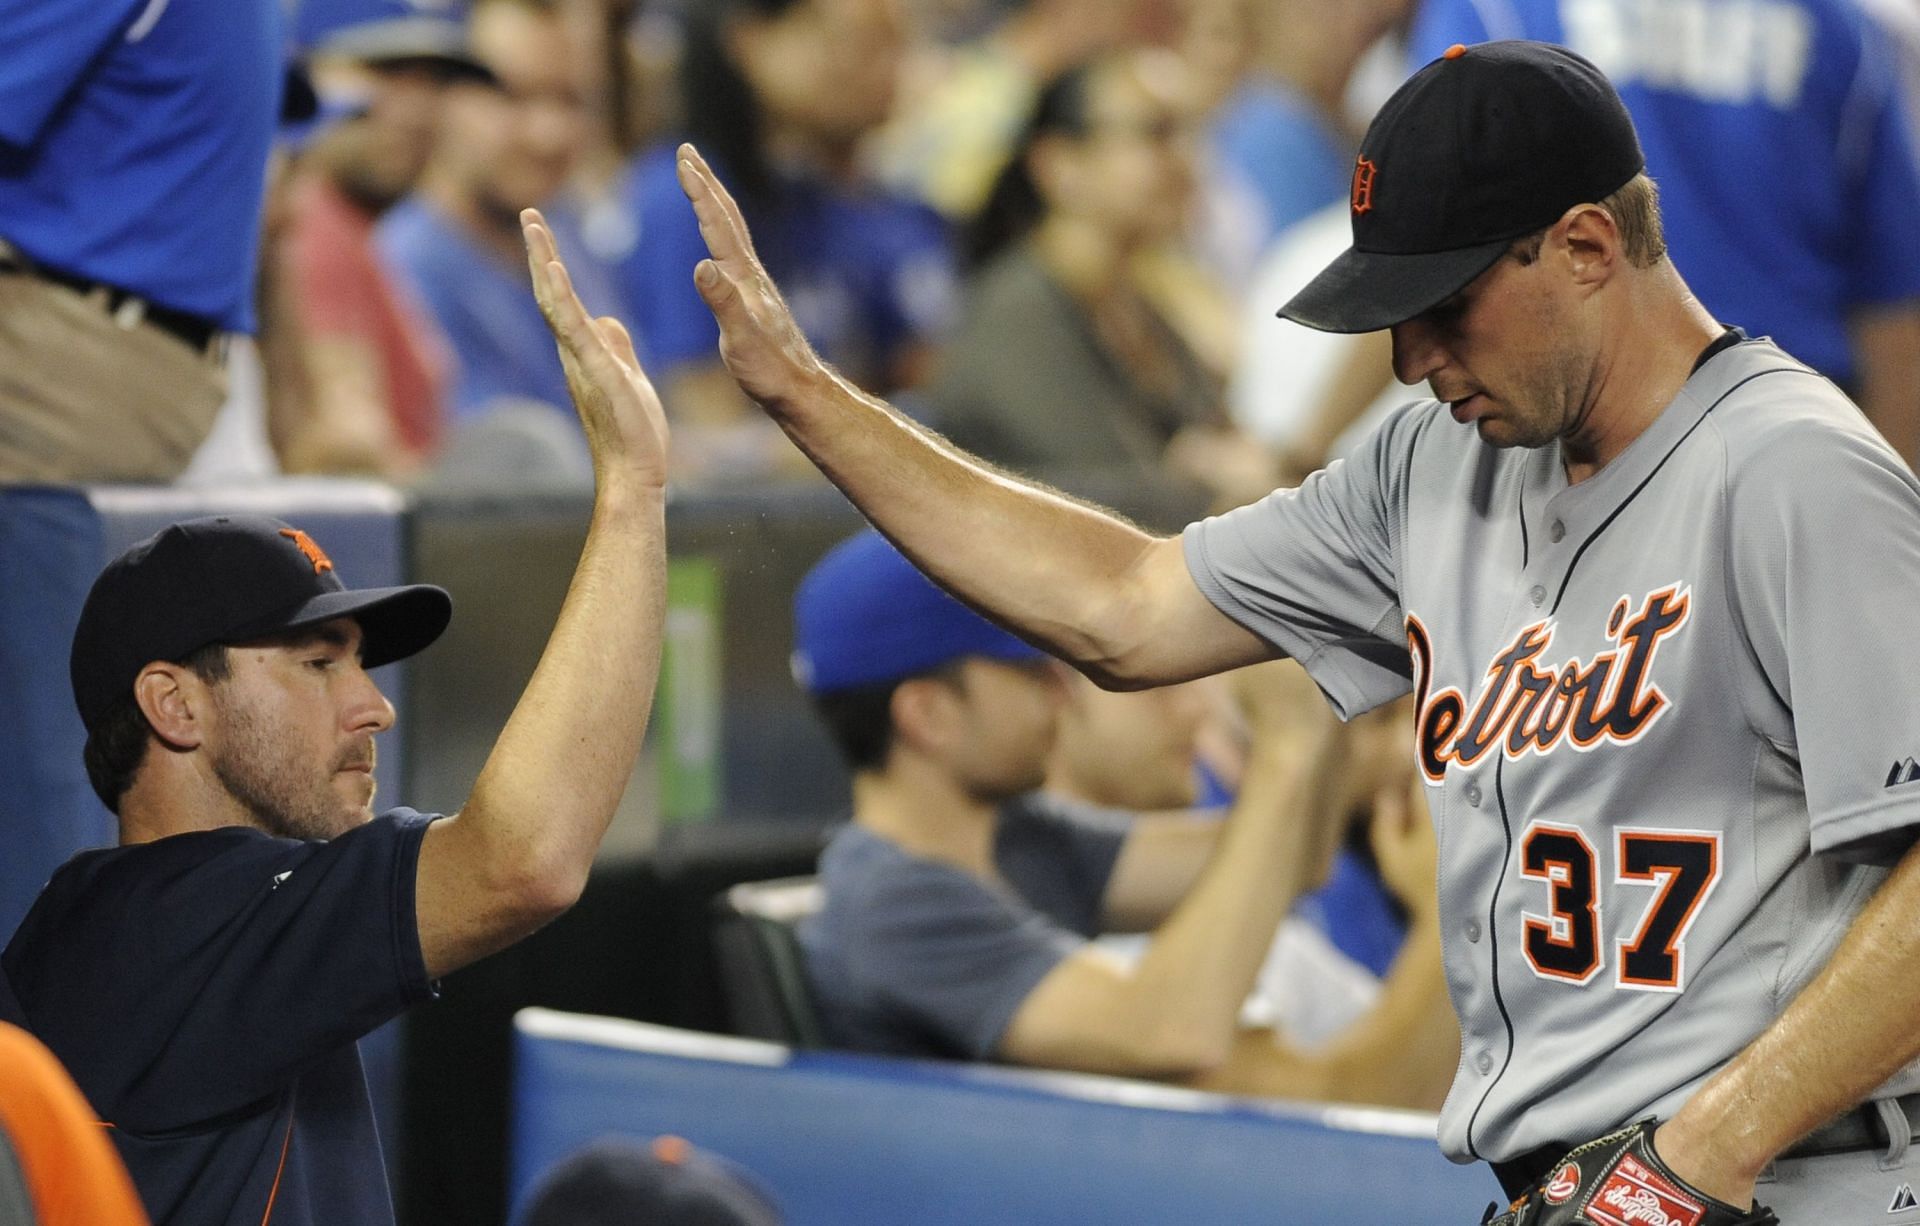 Detroit Tigers v Toronto Blue Jays: Max Scherzer of the Detroit Tigers high-fives teammate Justin Verlander during MLB game against the Toronto Blue Jays July 3, 2013 (Photo by Brad White/Getty Images)